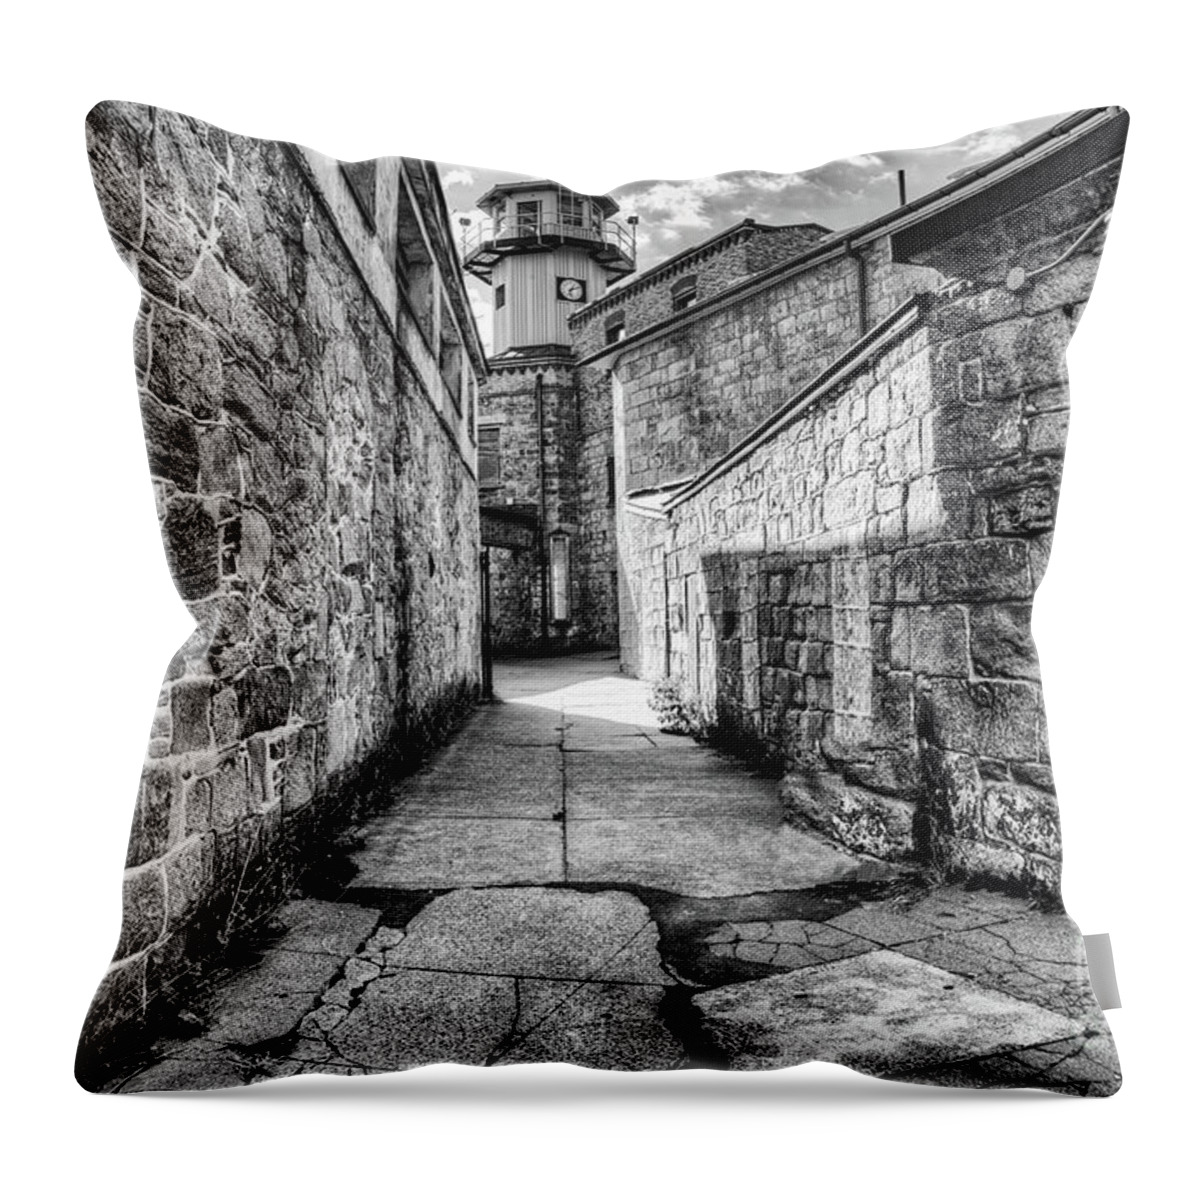 Eastern State Penitentiary Throw Pillow featuring the photograph The Watch Tower Eastern State Penitentiary by Anthony Sacco